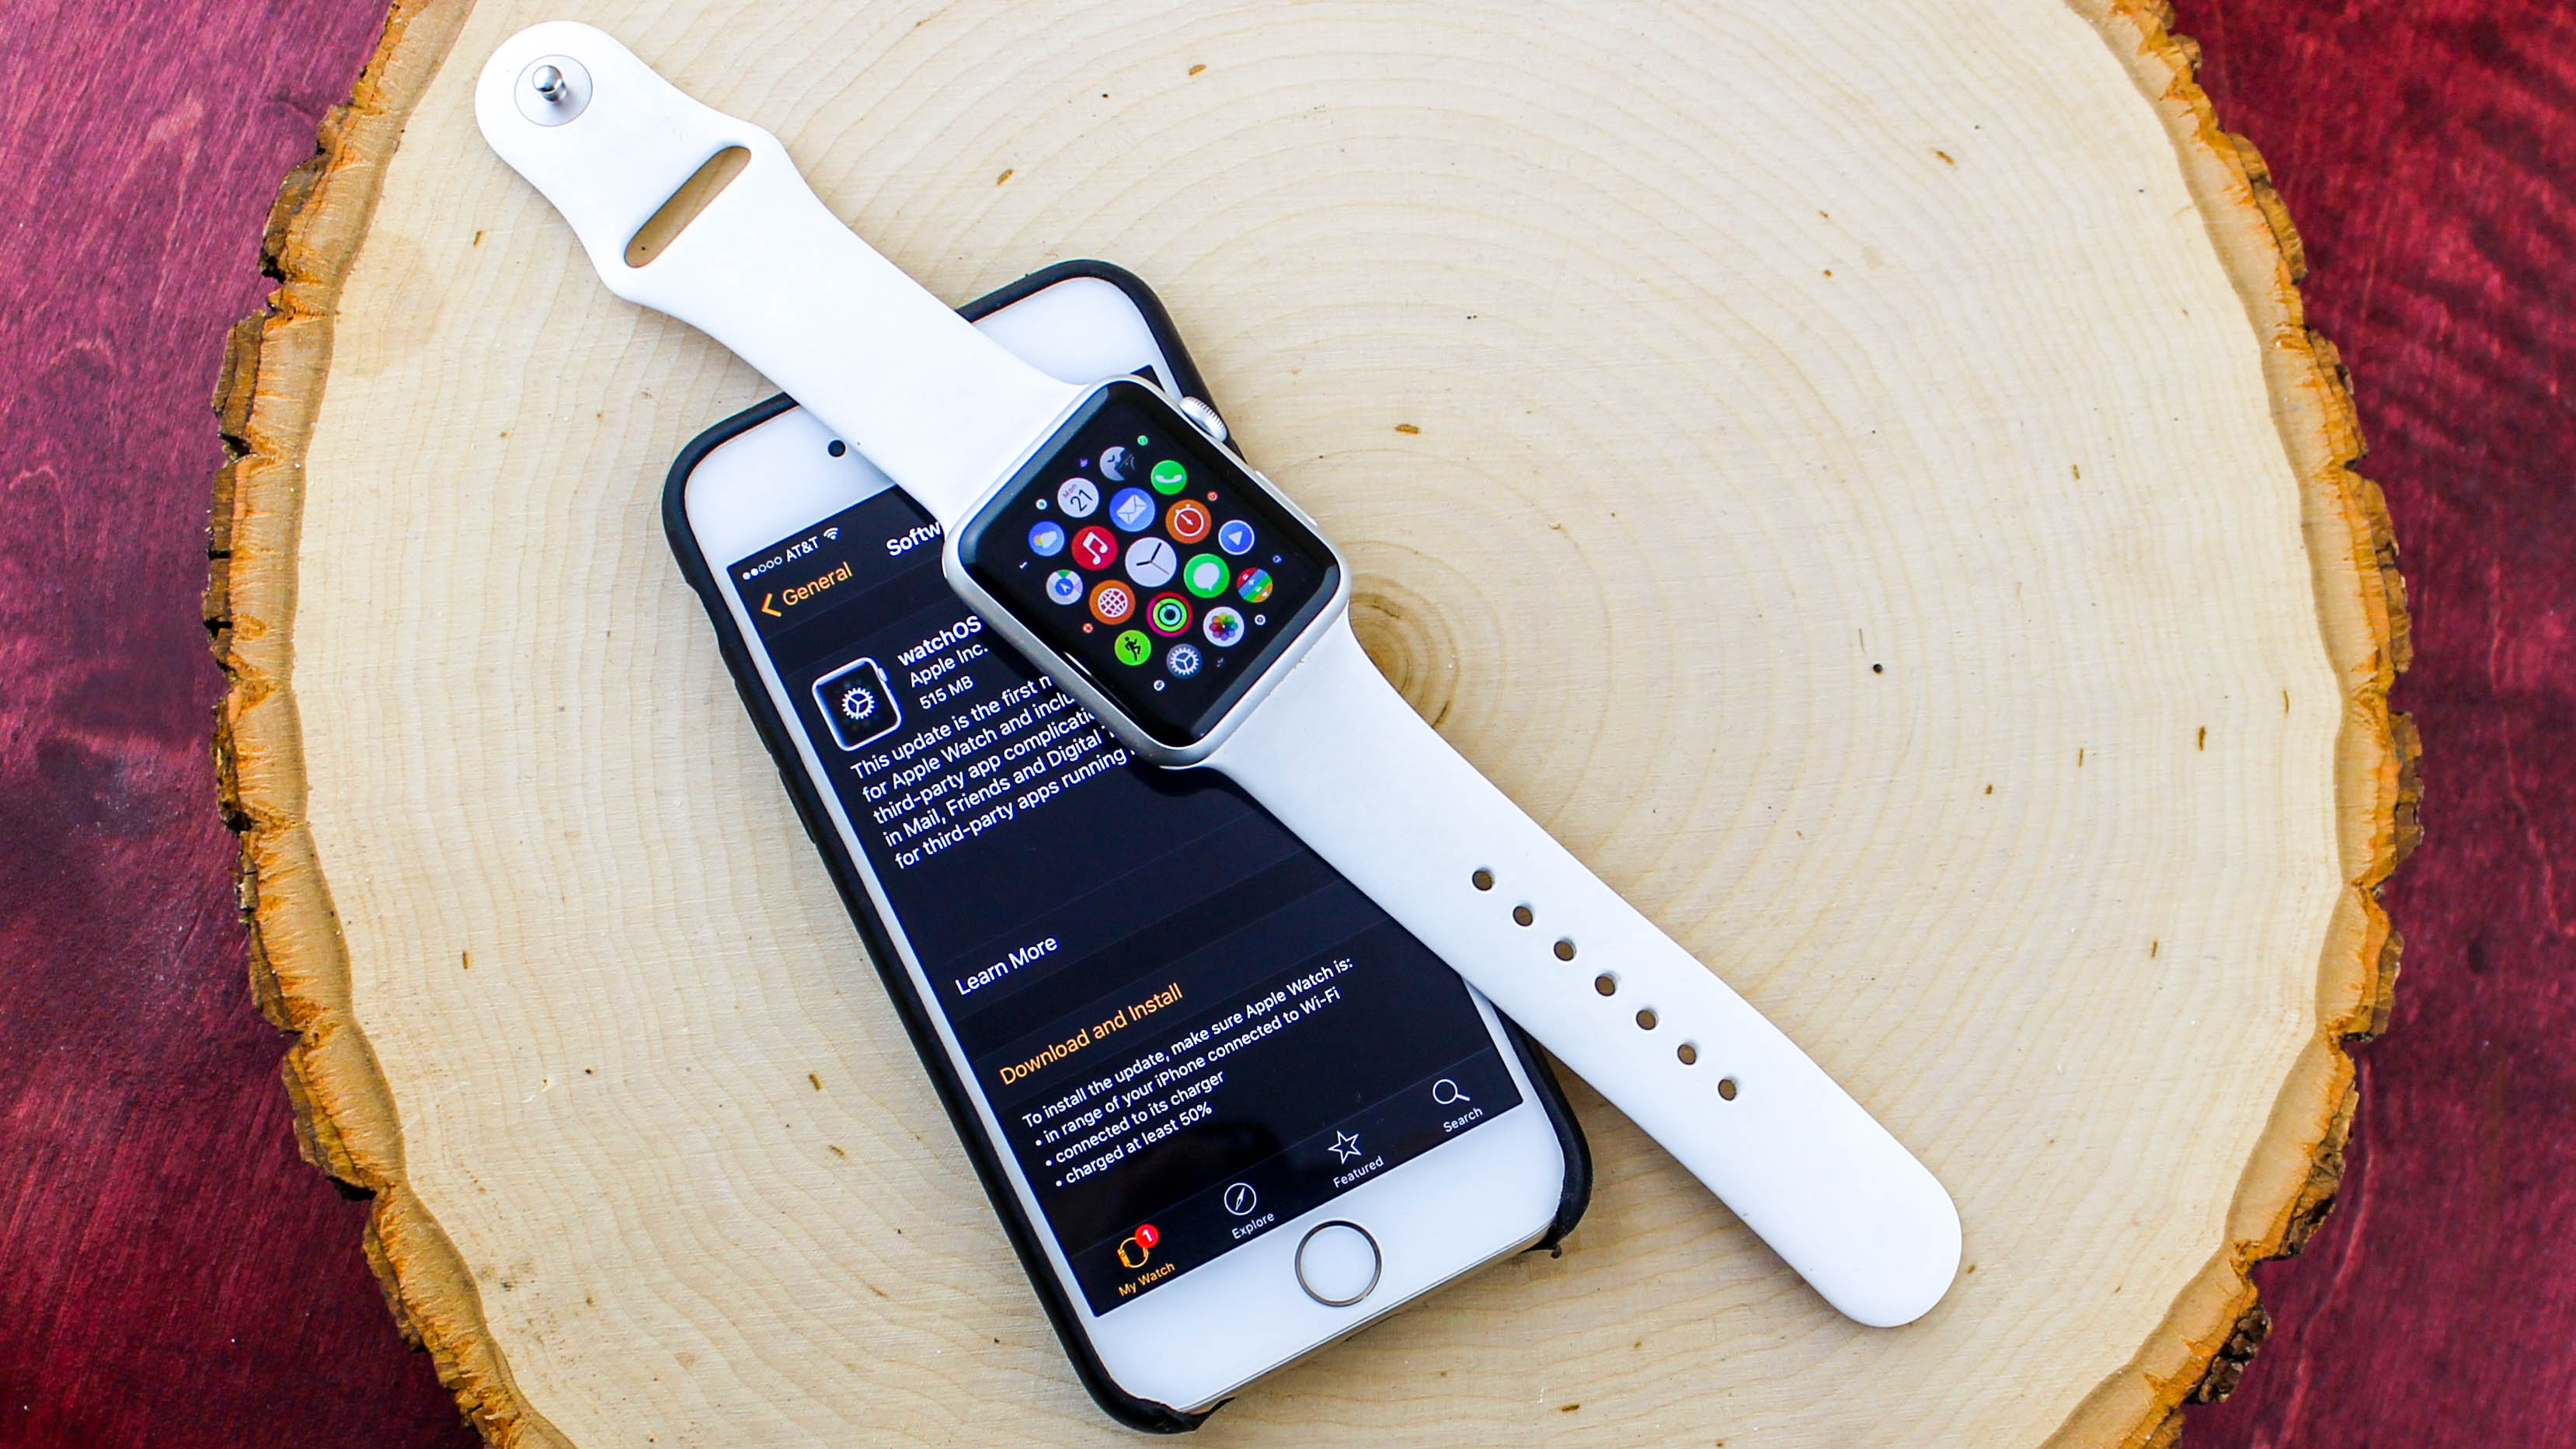 iphone and apple watch deal